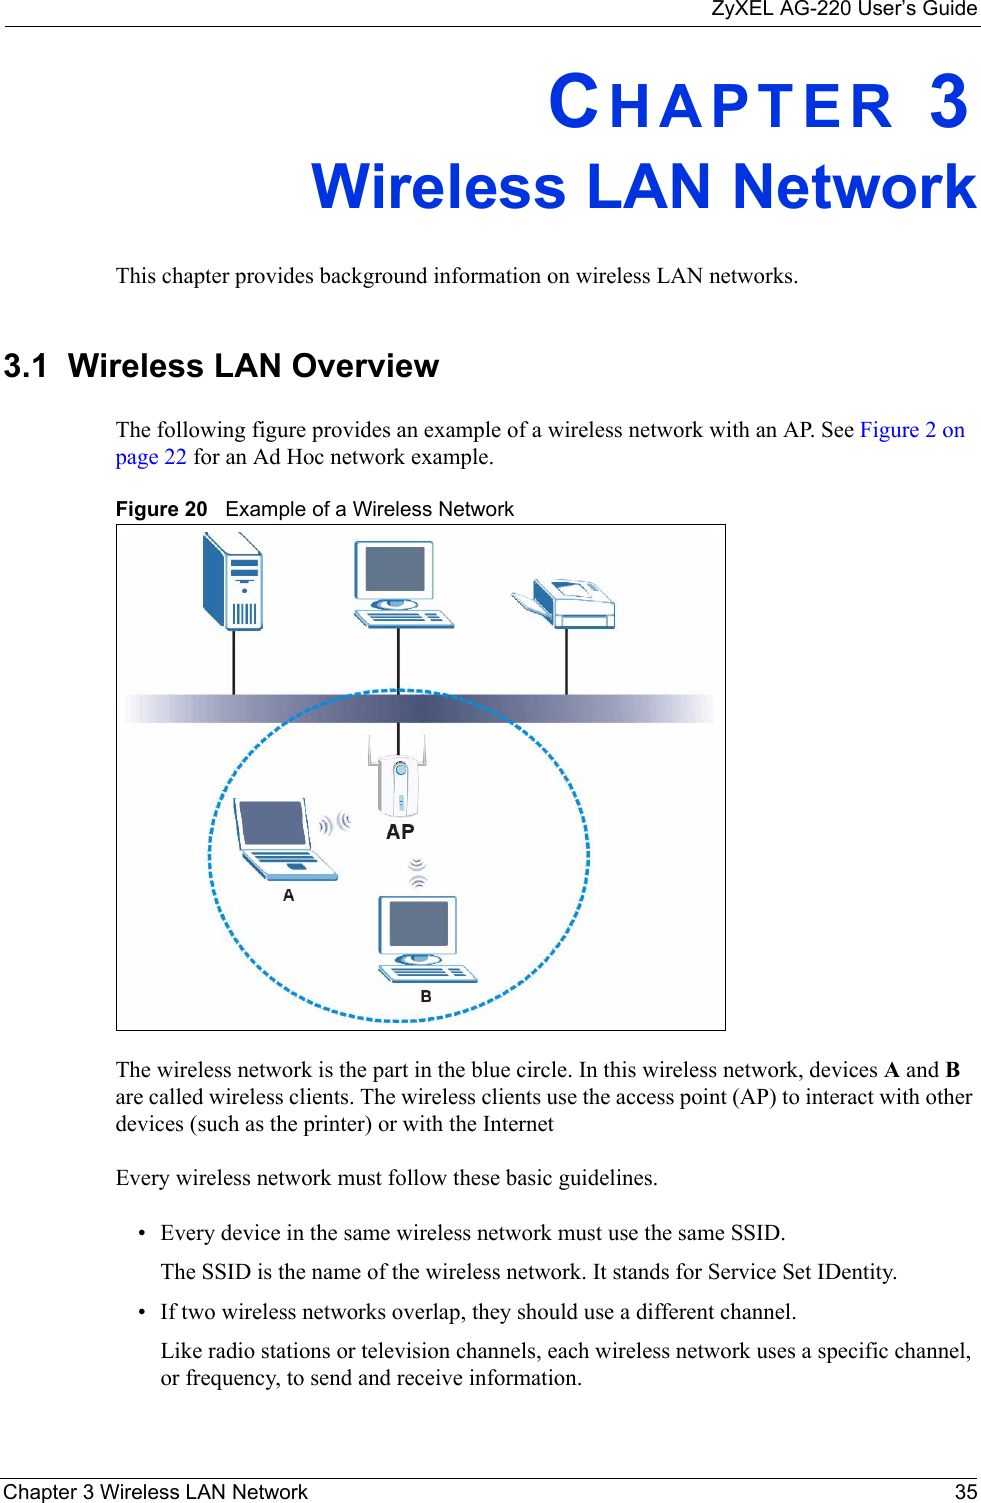 ZyXEL AG-220 User’s GuideChapter 3 Wireless LAN Network 35CHAPTER 3Wireless LAN NetworkThis chapter provides background information on wireless LAN networks.3.1  Wireless LAN Overview The following figure provides an example of a wireless network with an AP. See Figure 2 on page 22 for an Ad Hoc network example.Figure 20   Example of a Wireless NetworkThe wireless network is the part in the blue circle. In this wireless network, devices A and B are called wireless clients. The wireless clients use the access point (AP) to interact with other devices (such as the printer) or with the InternetEvery wireless network must follow these basic guidelines.• Every device in the same wireless network must use the same SSID.The SSID is the name of the wireless network. It stands for Service Set IDentity.• If two wireless networks overlap, they should use a different channel.Like radio stations or television channels, each wireless network uses a specific channel, or frequency, to send and receive information.